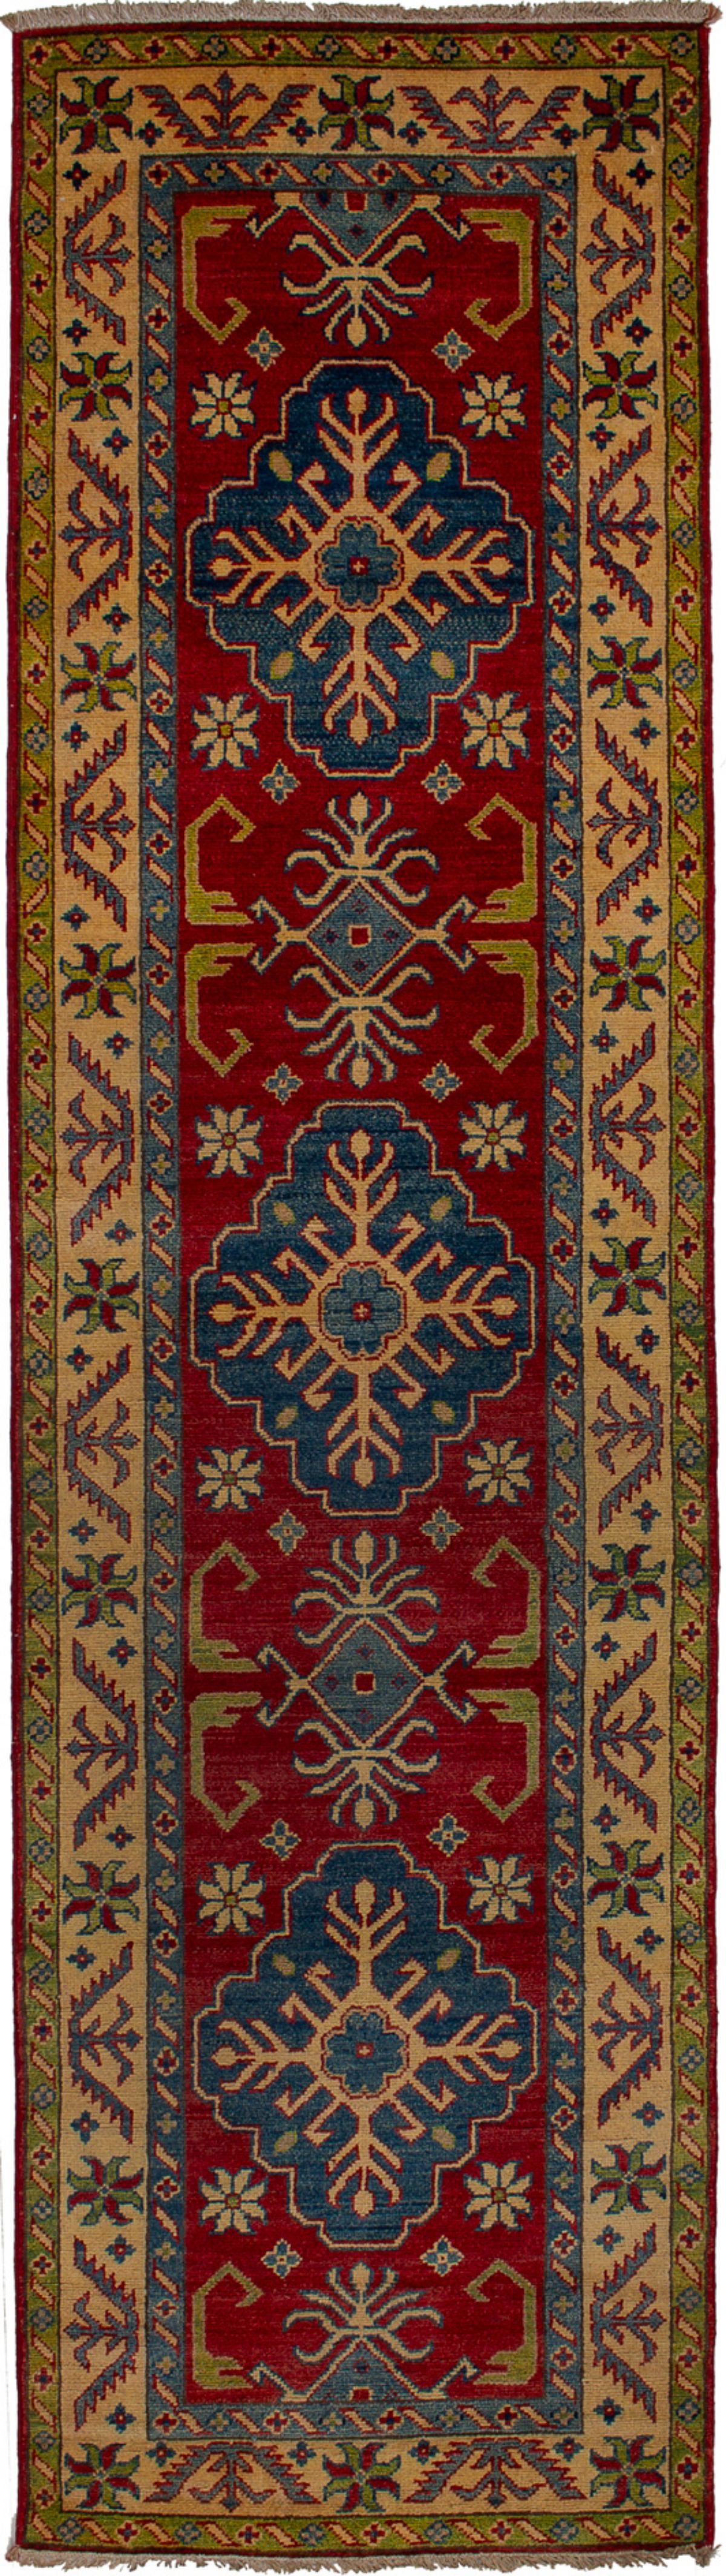 Hand-knotted Finest Gazni Red Wool Rug 2'6" x 9'6"  Size: 2'6" x 9'6"  